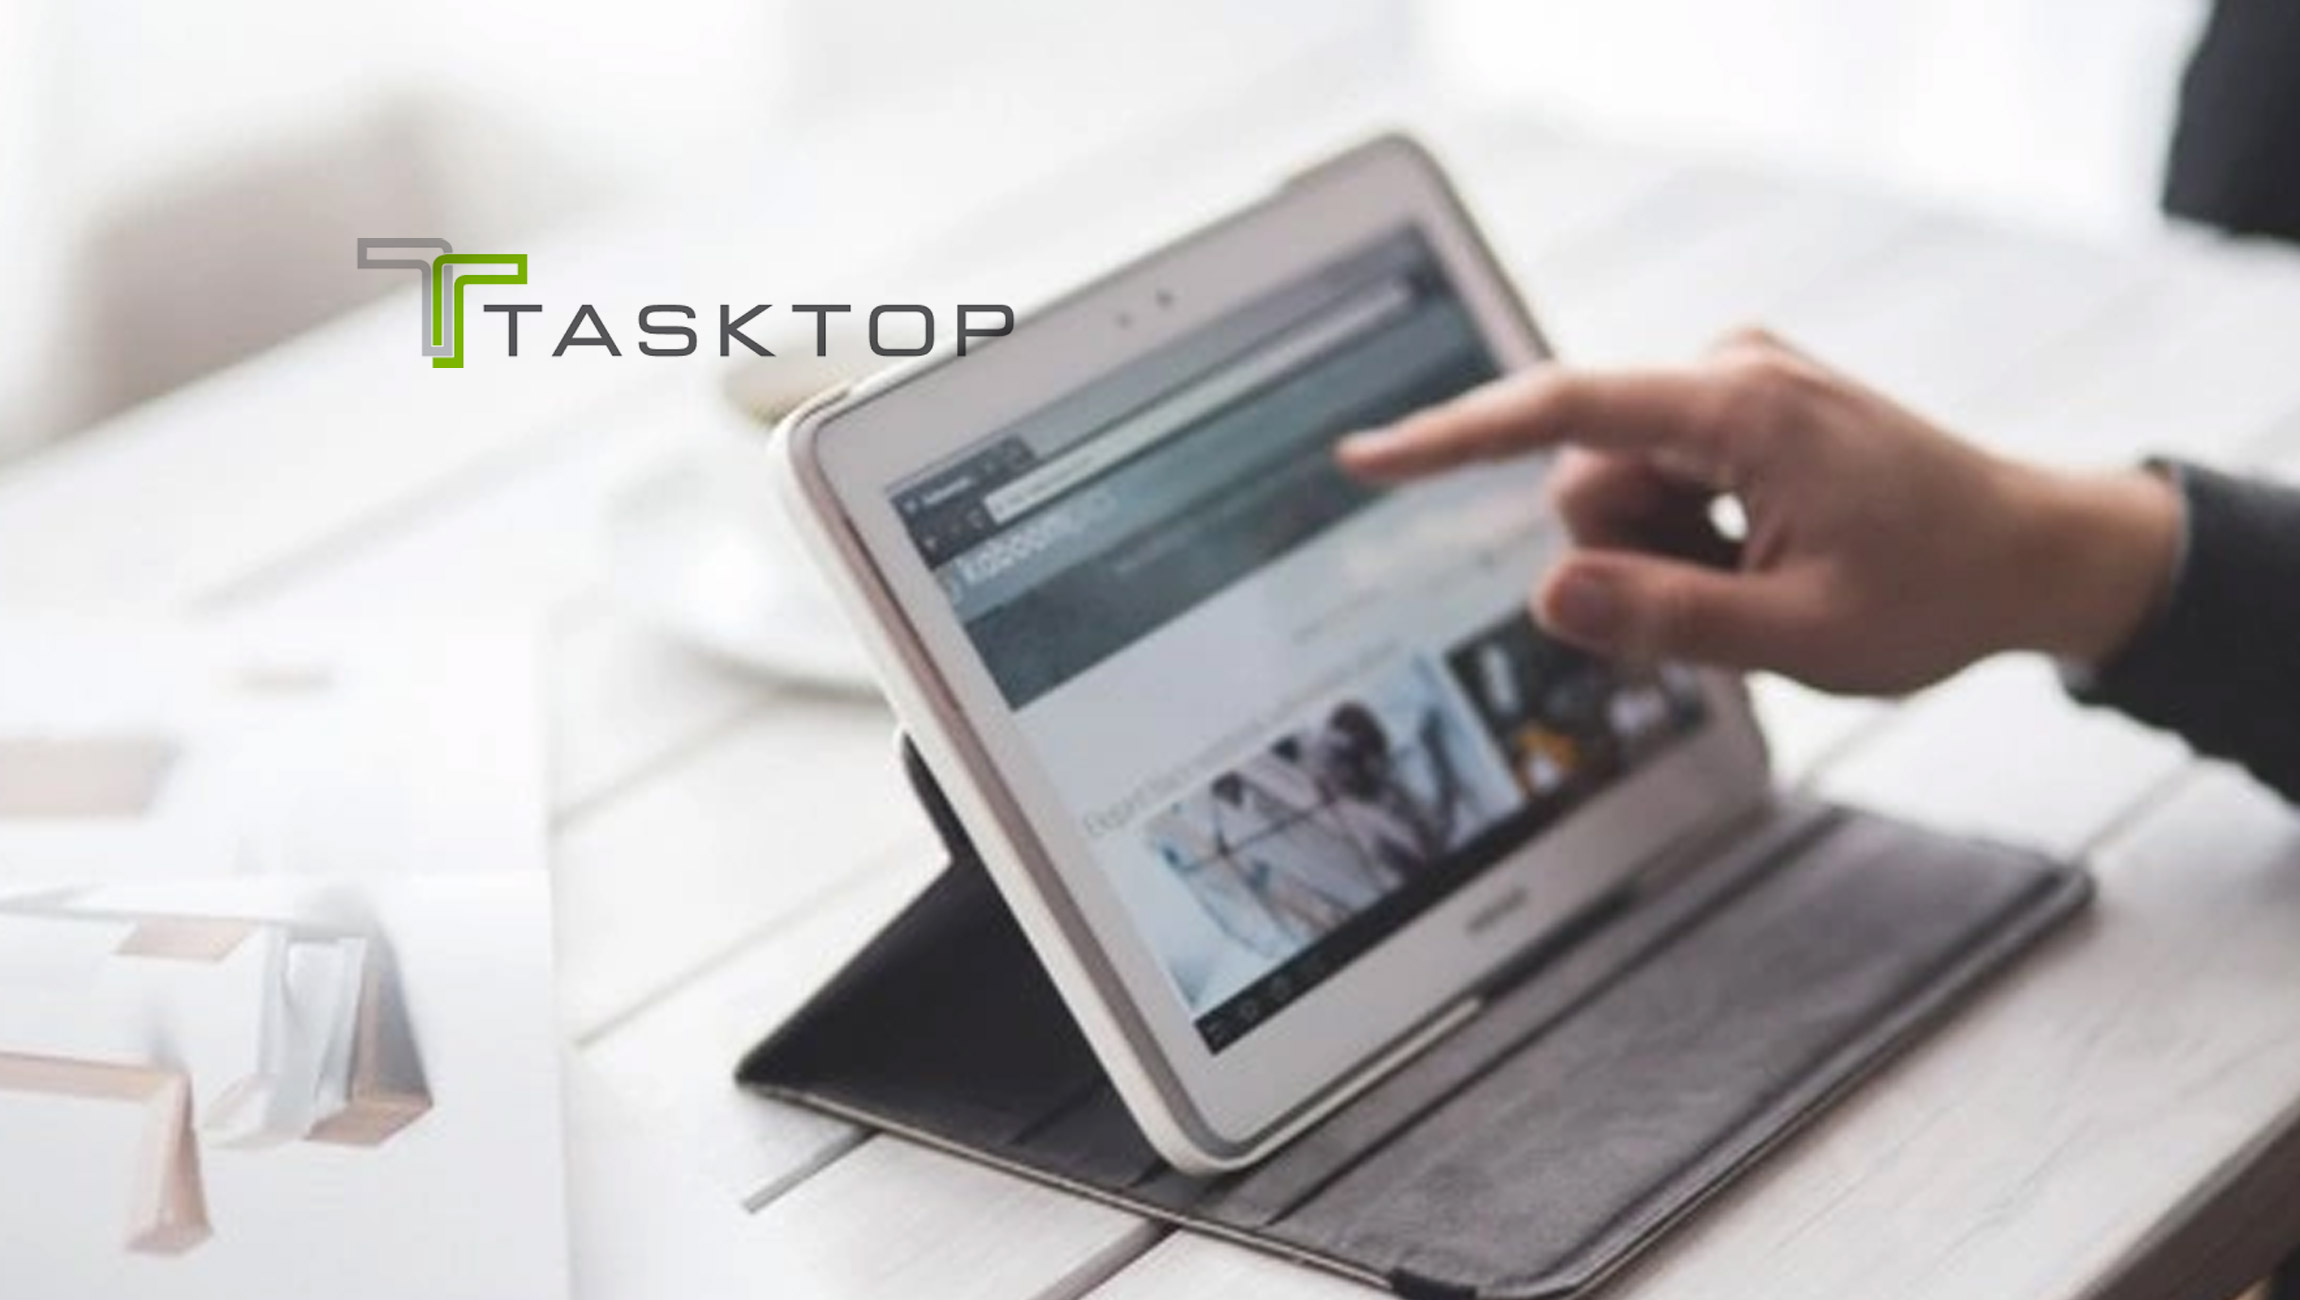 Tasktop Named Leader in Value Stream Management by Independent Research Firm